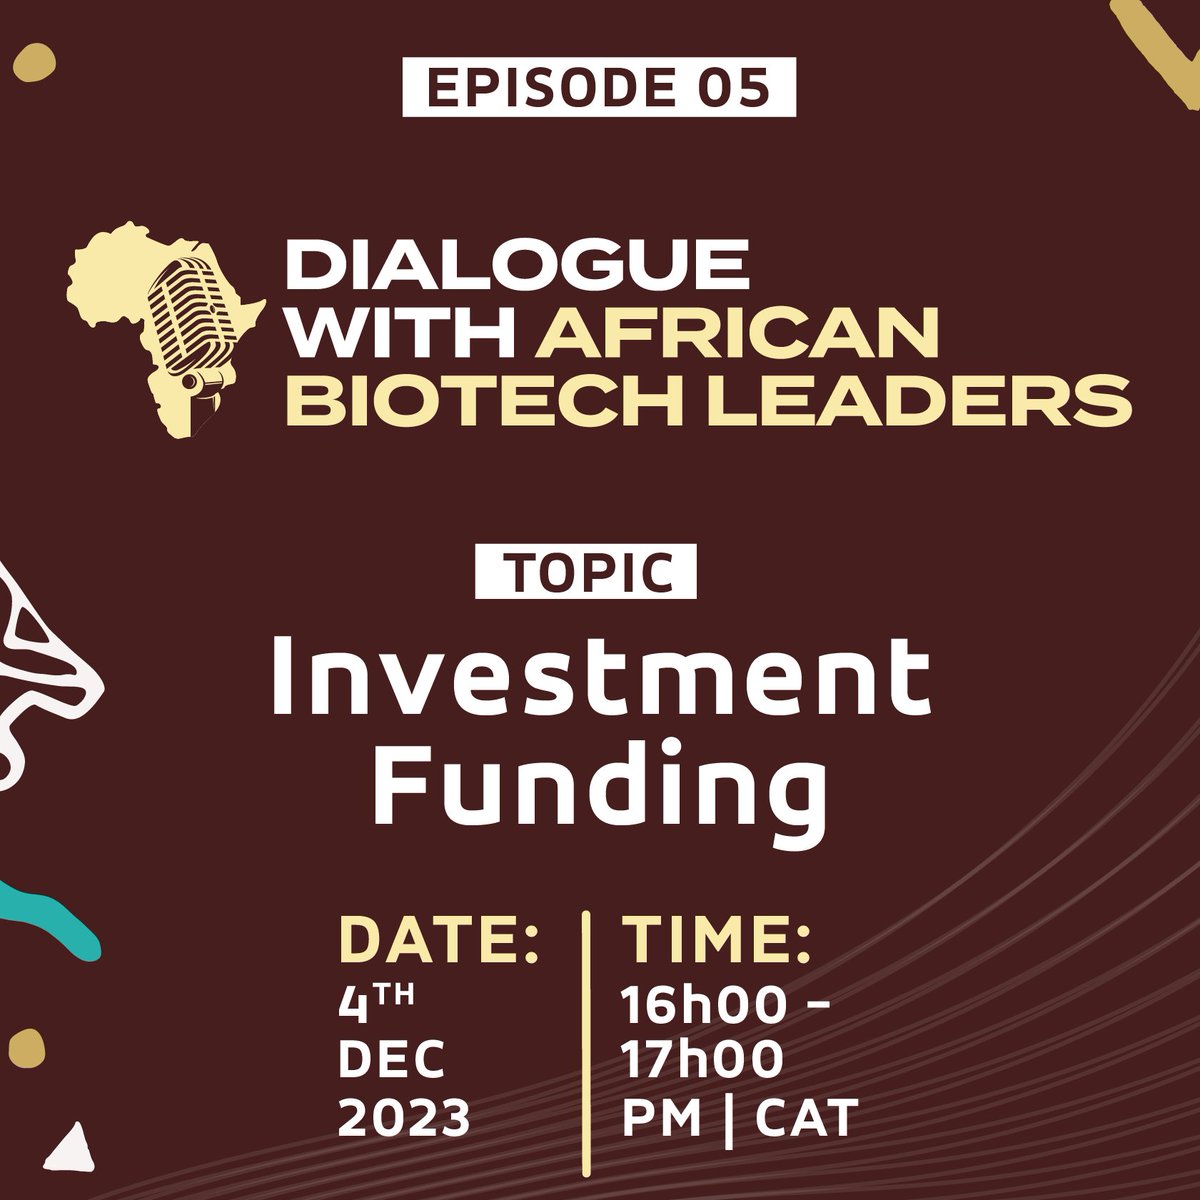 BIO Africa is pleased to announce the speakers for the next Dialogue with African Biotech Leaders segment on Investment Funding: o Dr Phehane an executive for Bioeconomy at TIA. o Gian-Marco, an investment principal at OneBio. Visit bioafricaconvention.com/dialoguewithaf… to secure your spot.